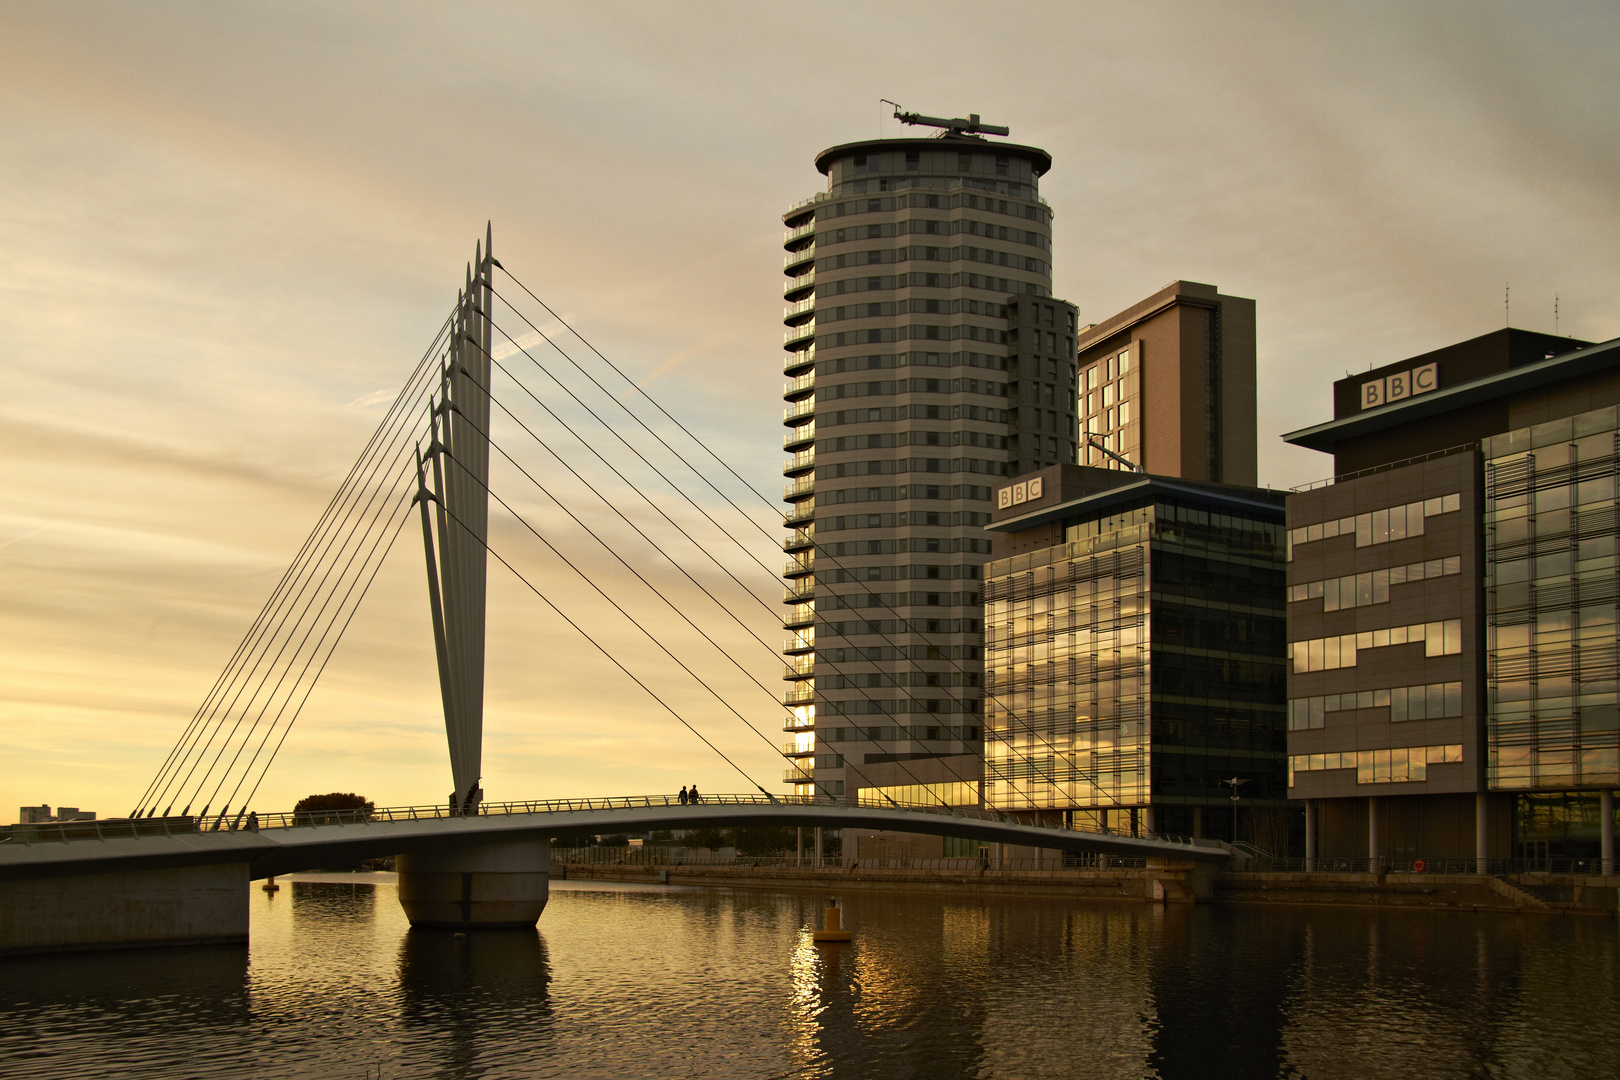 The Quays at sunset